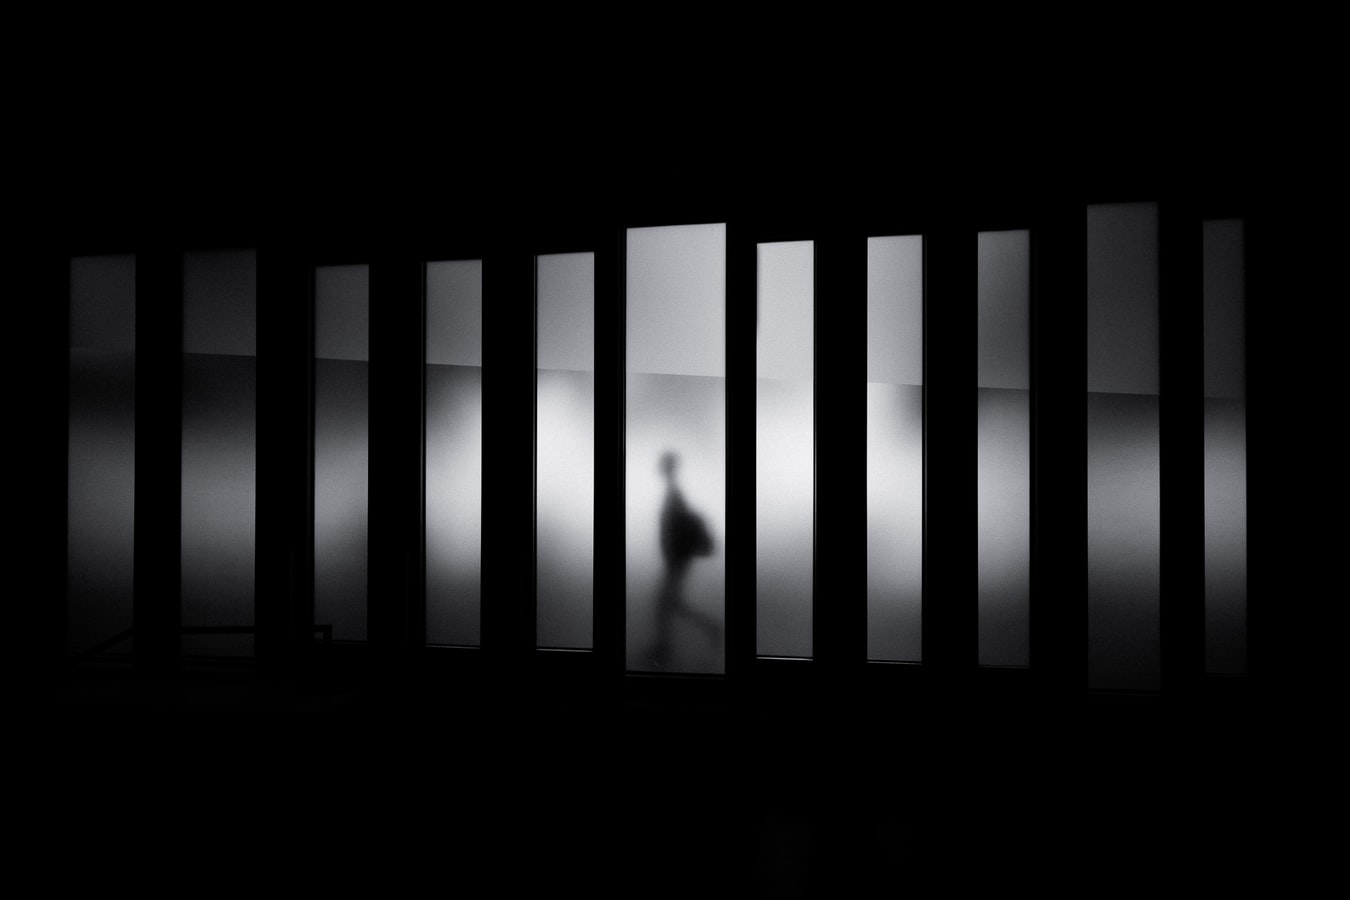 A person in shadows walks behind a series of windows in a black-and-white image